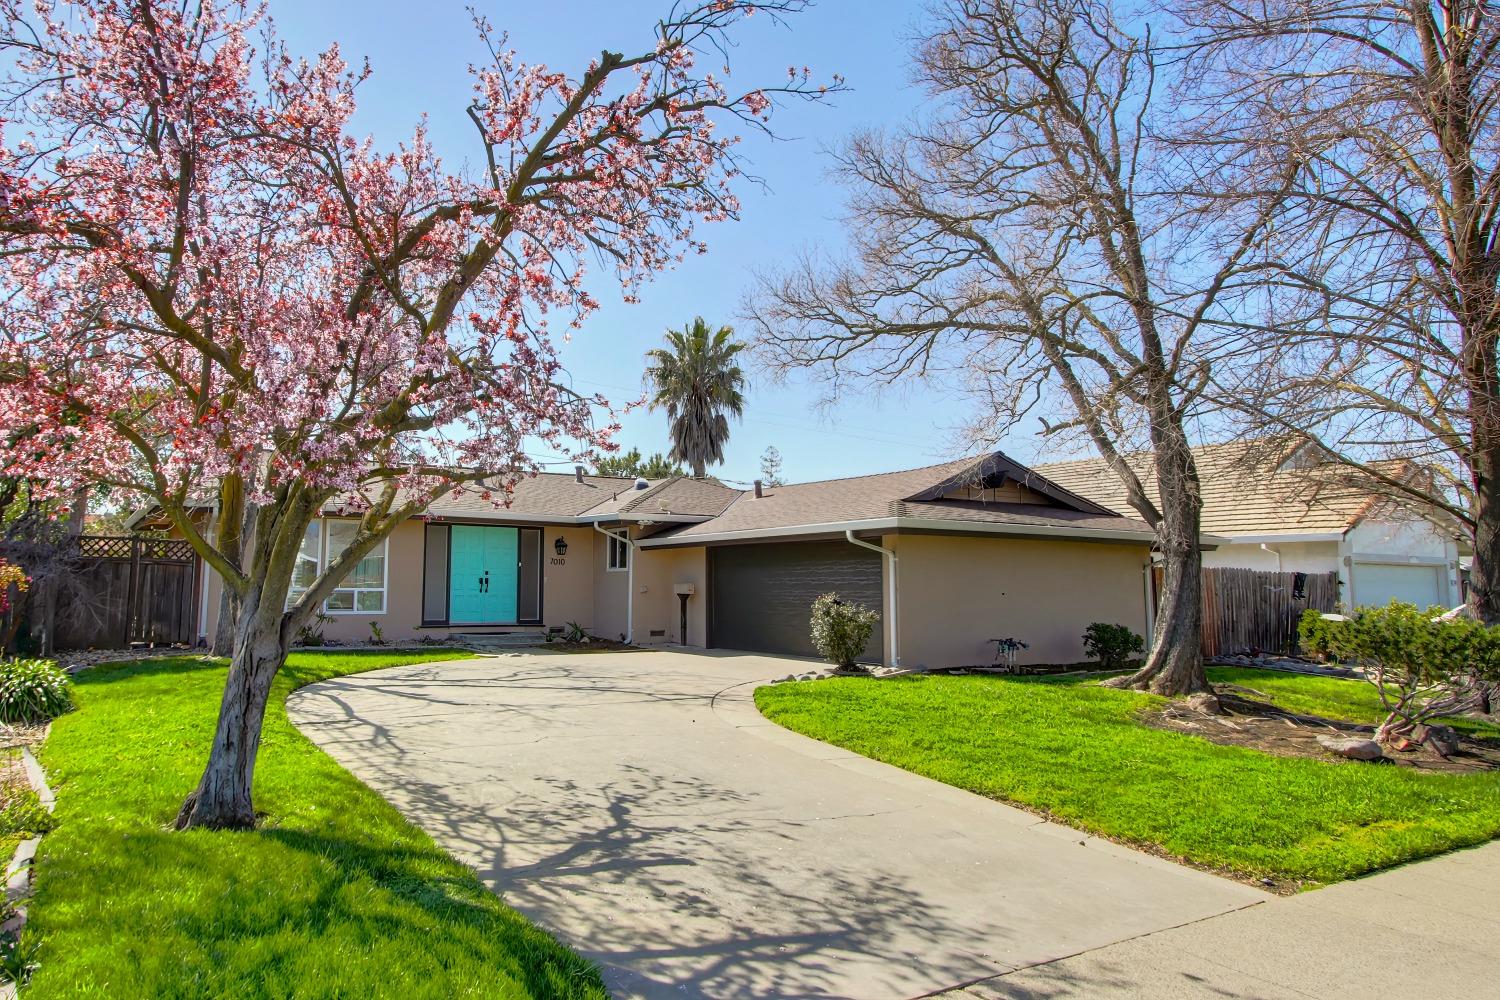 This could be the one! 7010 Flamingo Way is a wonderful mix of modern updates and retro charm. Floor